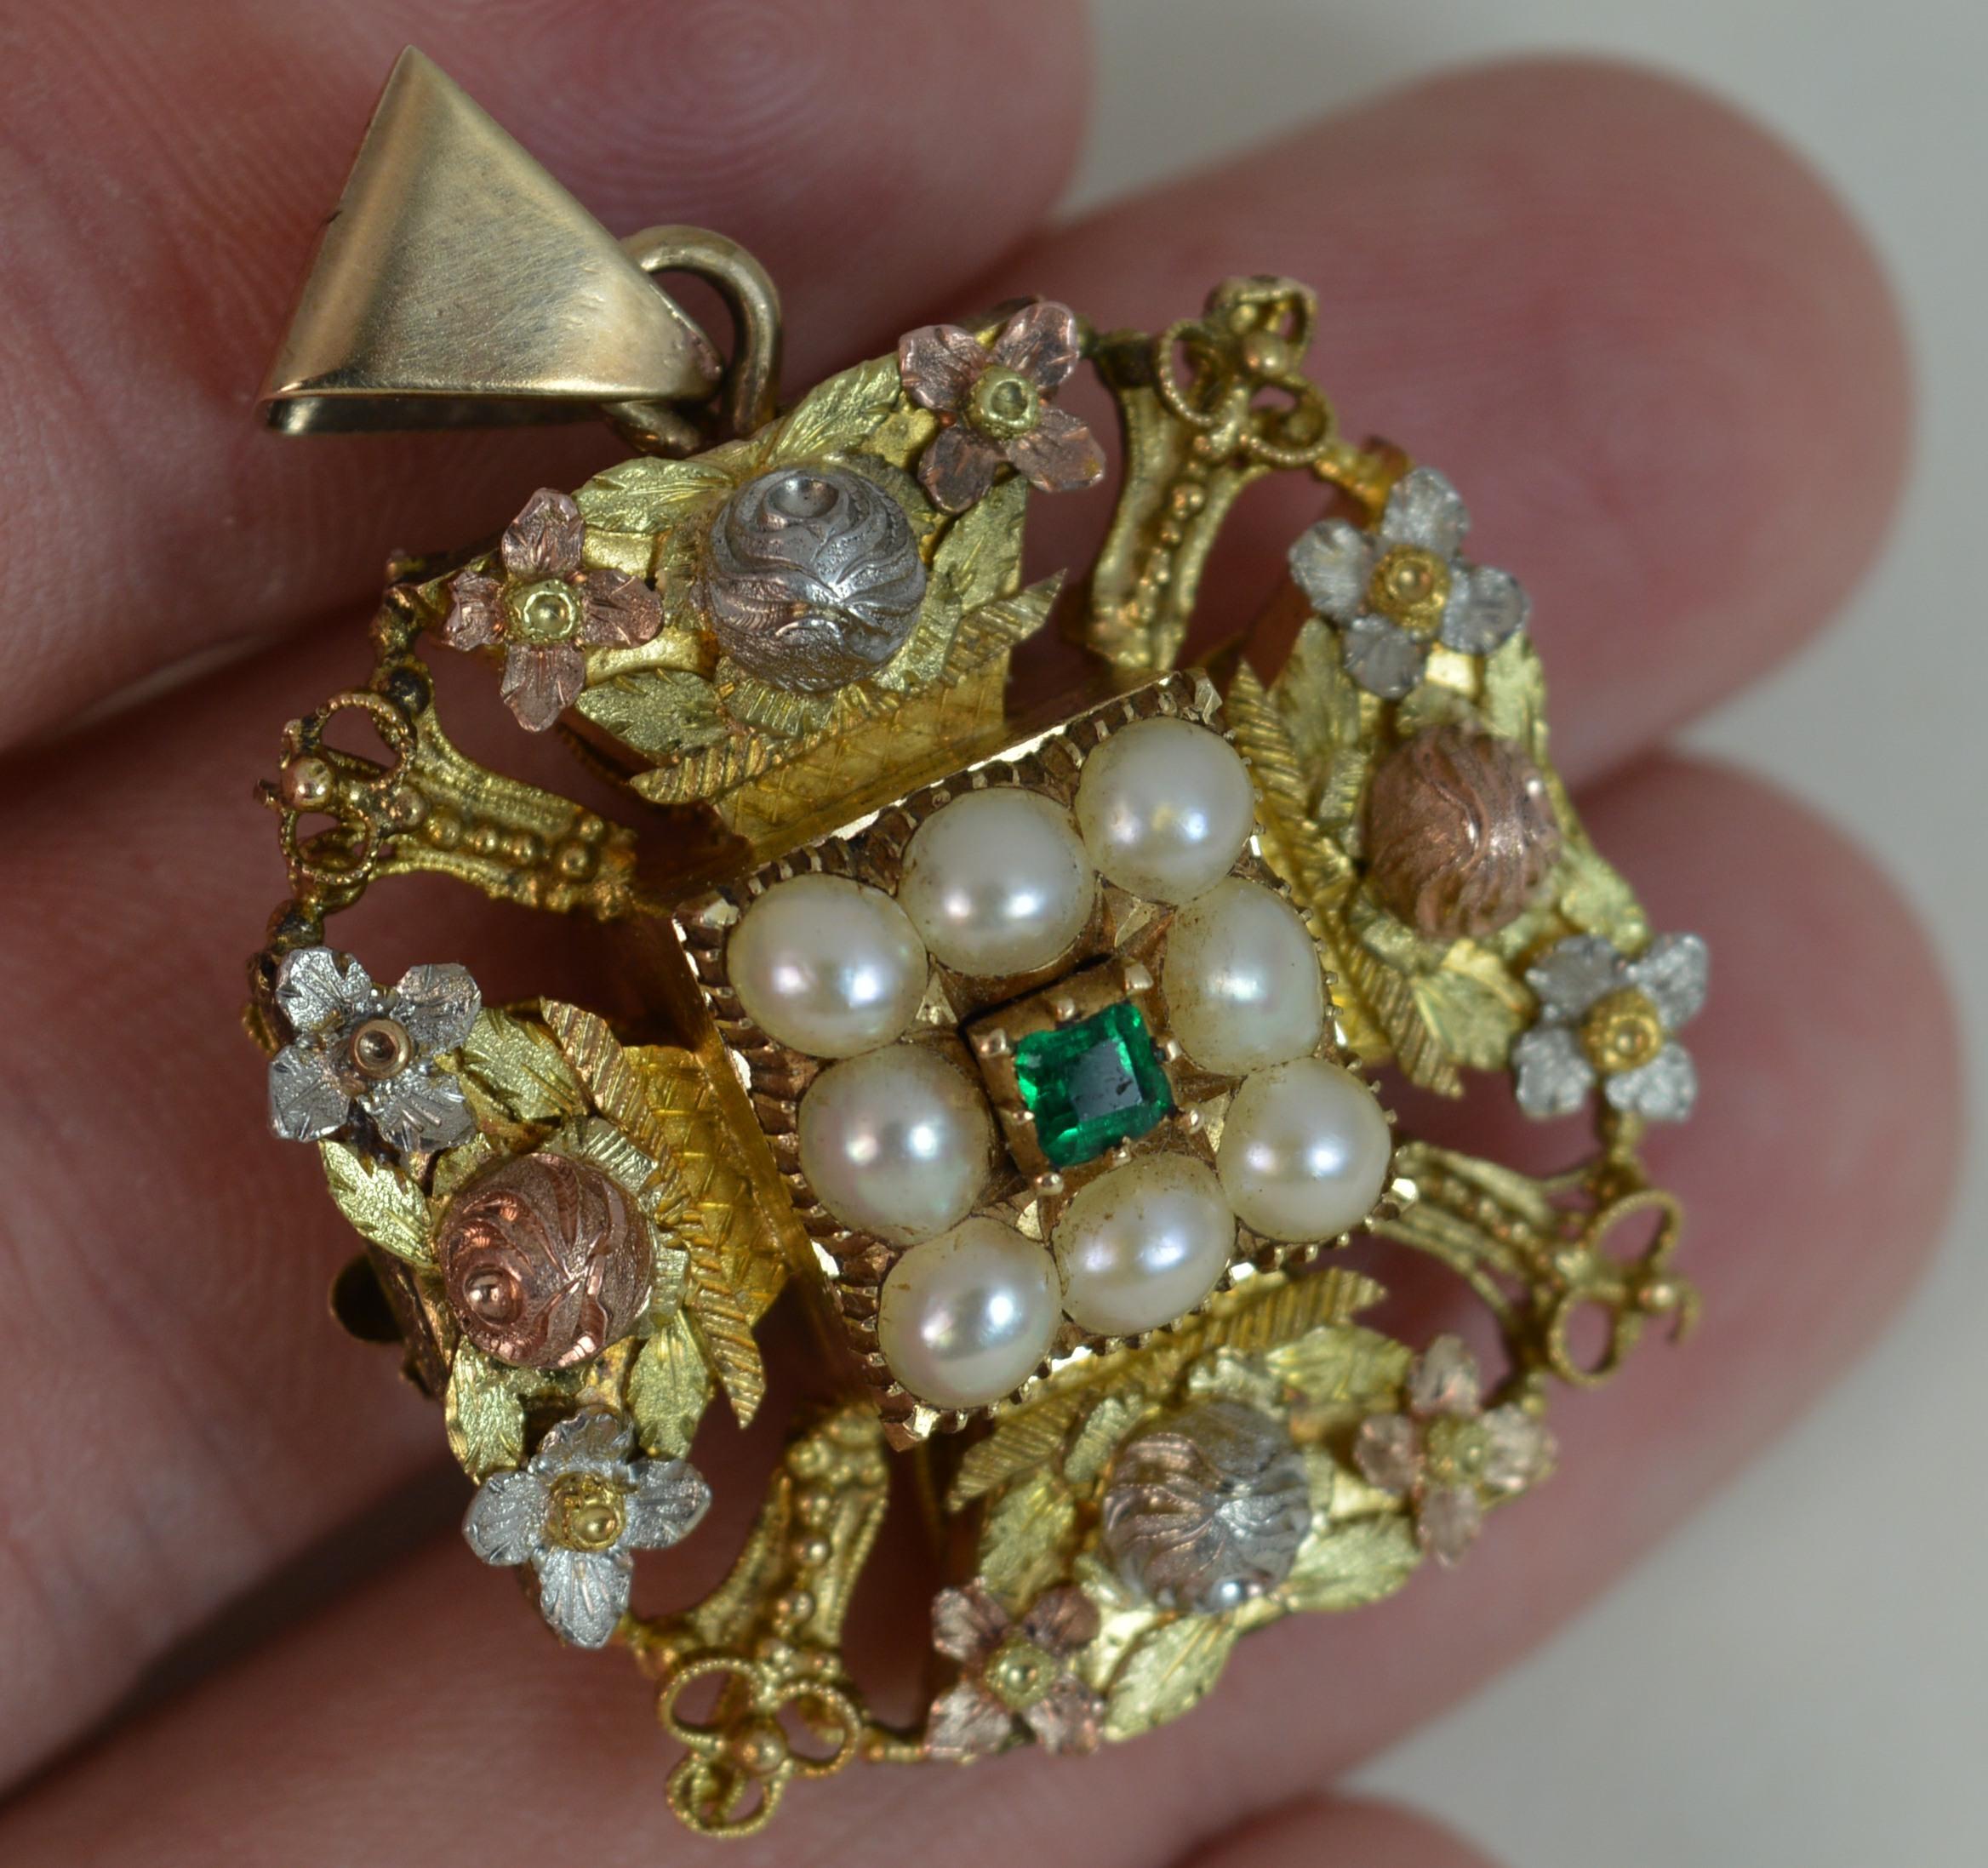 A rare and stunning George III period pendant.
Maltese cross shape designed with a Colombian emerald to the centre of pear border and a three coloured gold finish surrounding.
A wonderful gold floral pattern with pierced finish. Complete with locket